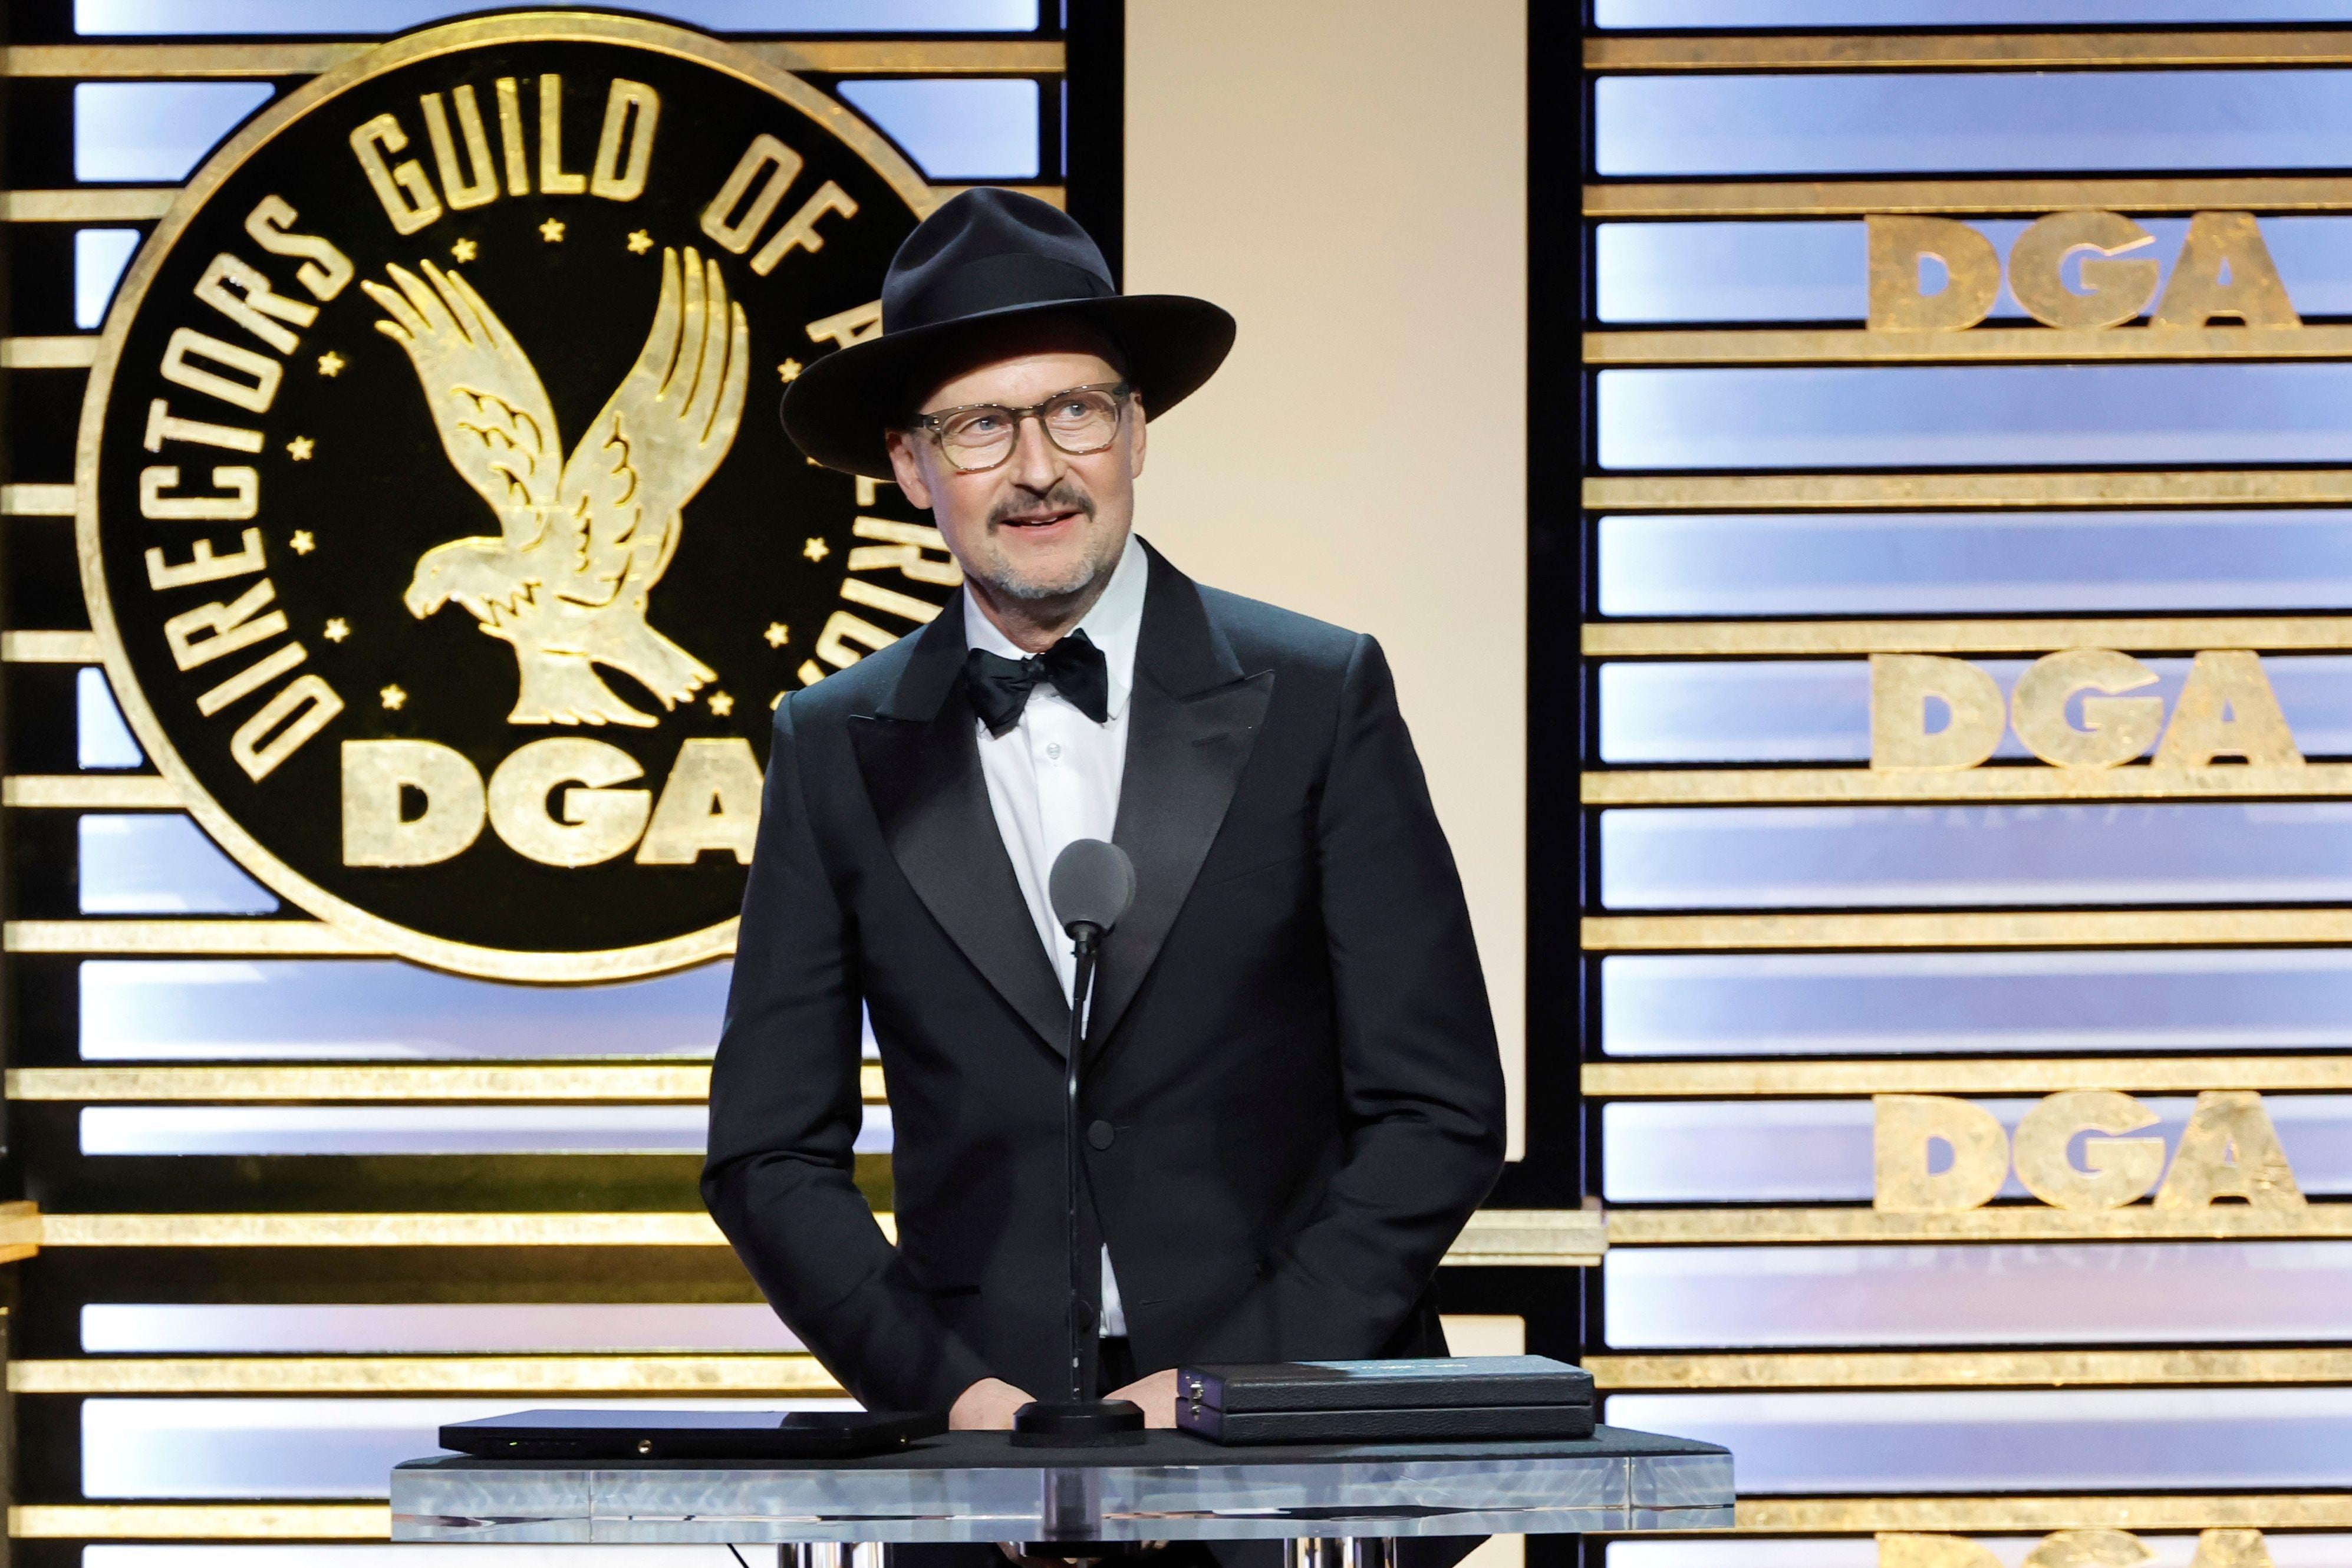 BEVERLY HILLS, CALIFORNIA - FEBRUARY 18: Todd Field accepts a DGA Awards Feature Film Medallion for “Tár” onstage during the 75th Directors Guild of America Awards at The Beverly Hilton on February 18, 2023 in Beverly Hills, California. (Photo by Kevin Winter/Getty Images)